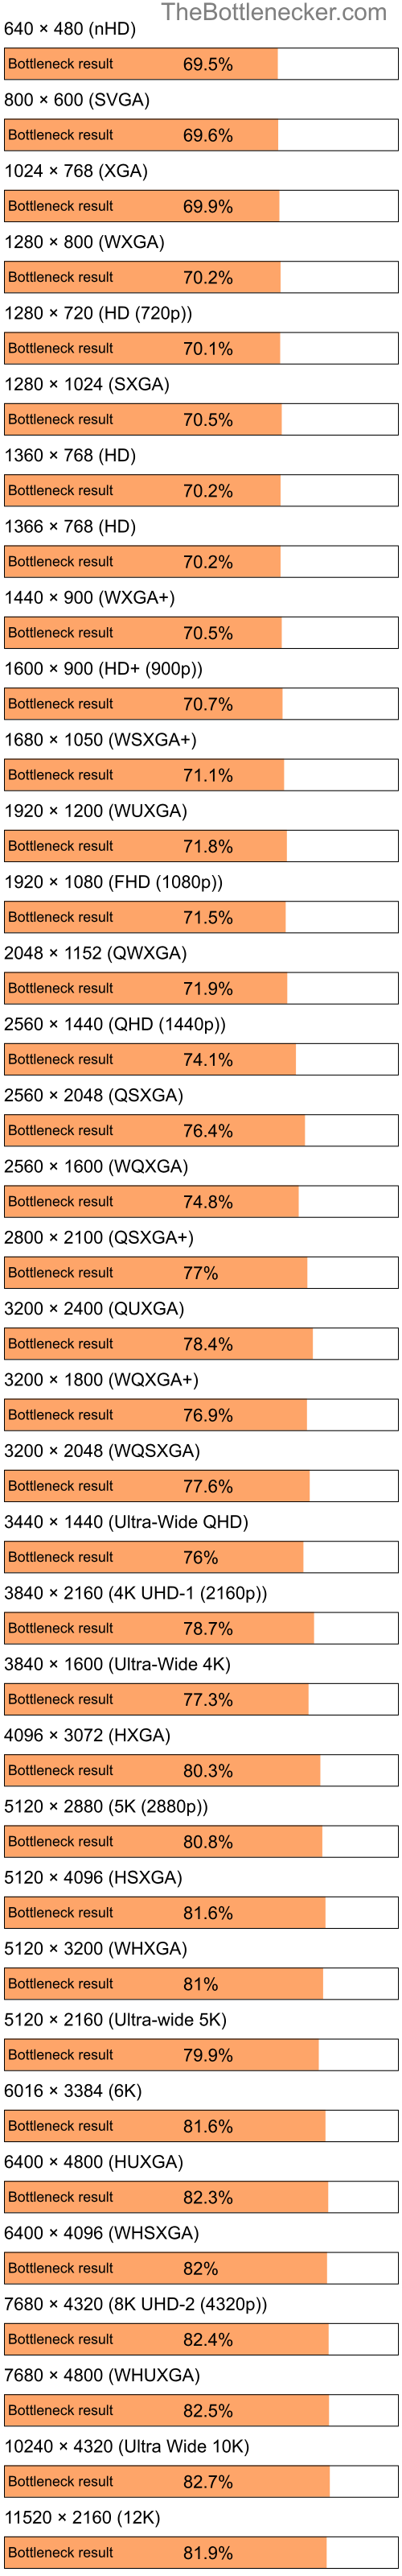 Bottleneck results by resolution for Intel Atom Z520 and AMD Mobility Radeon X700 in7 Days to Die